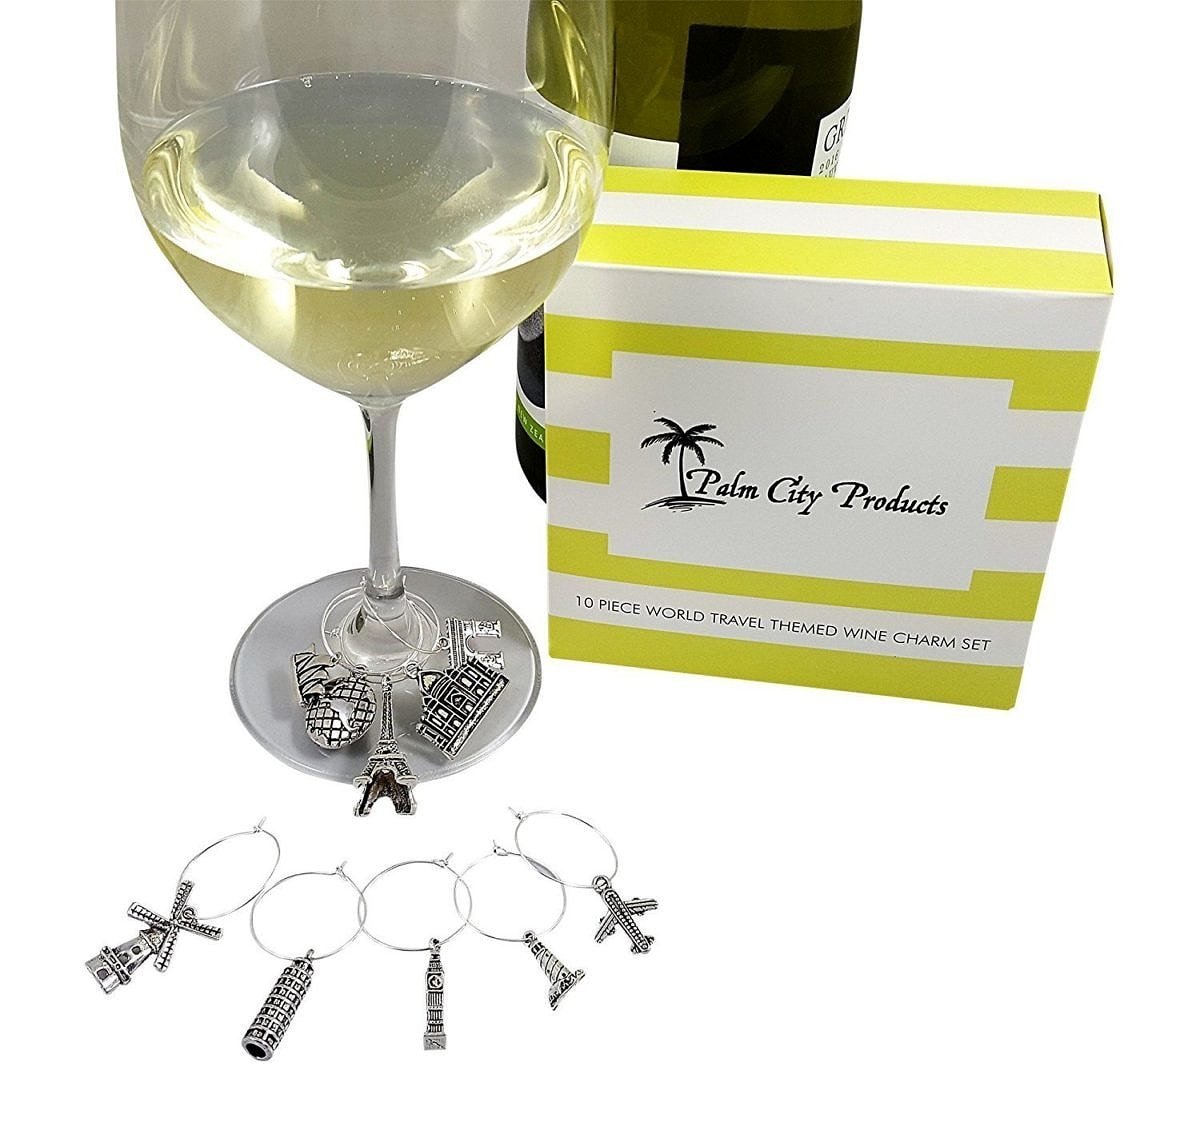 10 Piece World Travel Themed Wine Charm Set, hostess gift for travel lovers